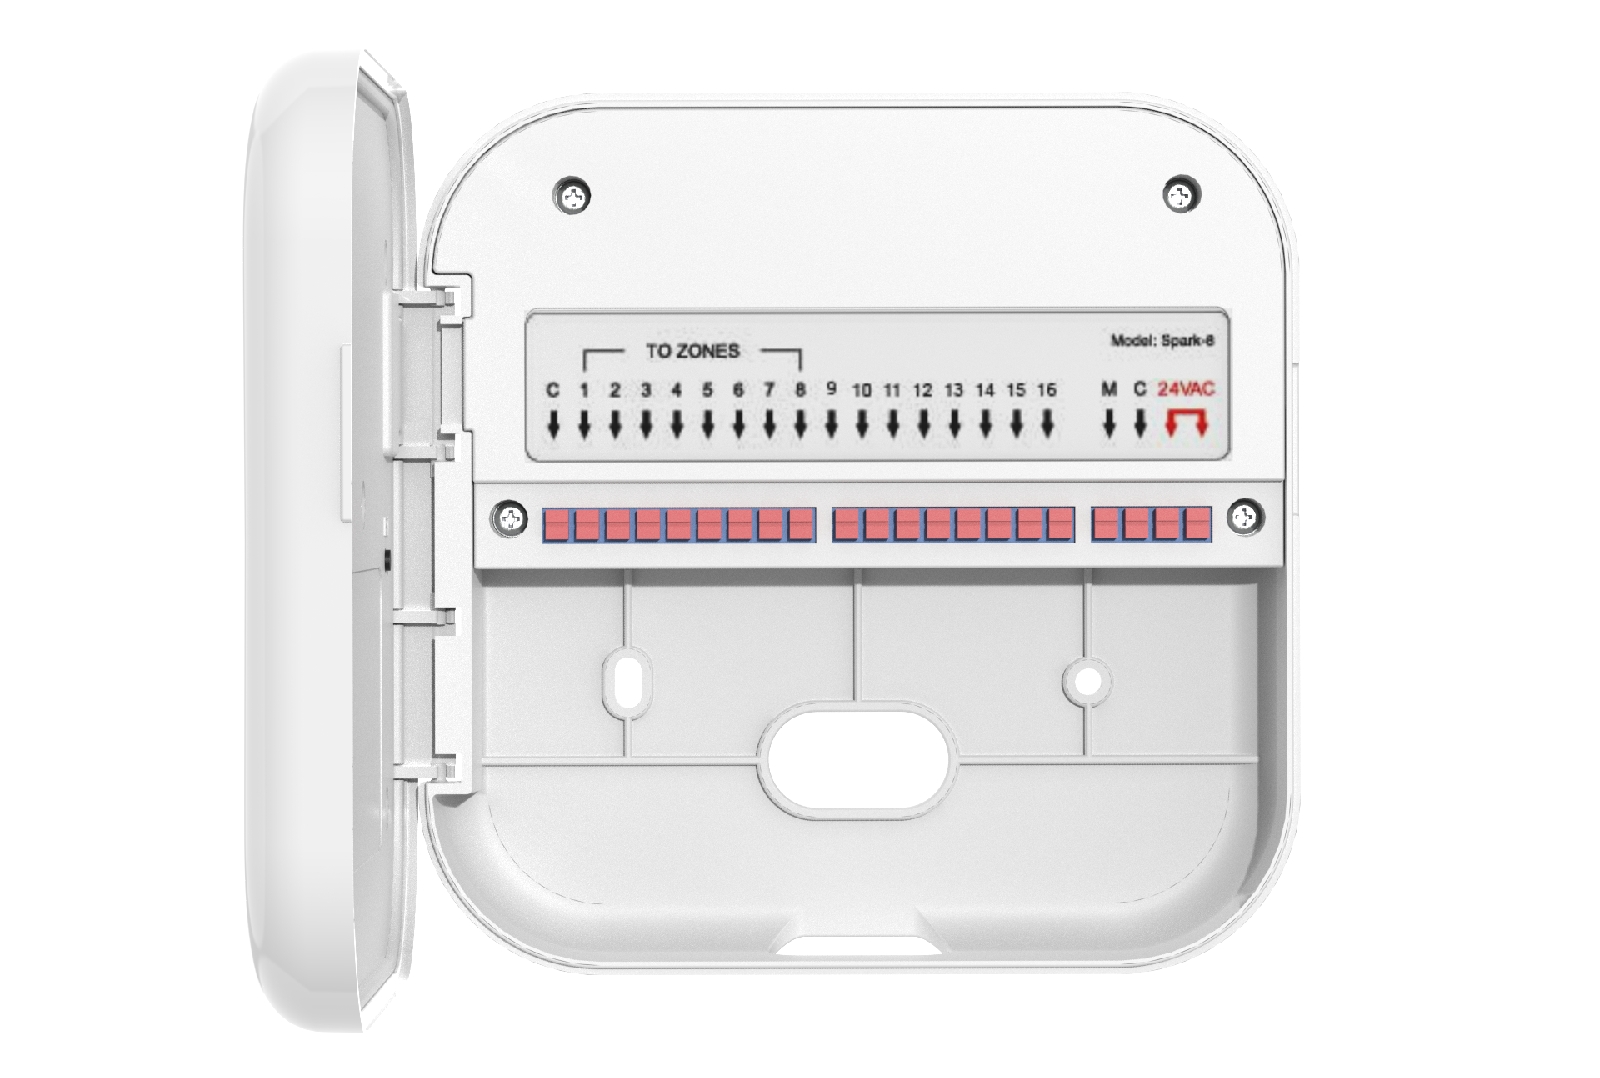 Netro Spark's wiring. From left to right, there are wires labeled C, 1 to 8 or 1 to 16, as well as the M, C and power wires.